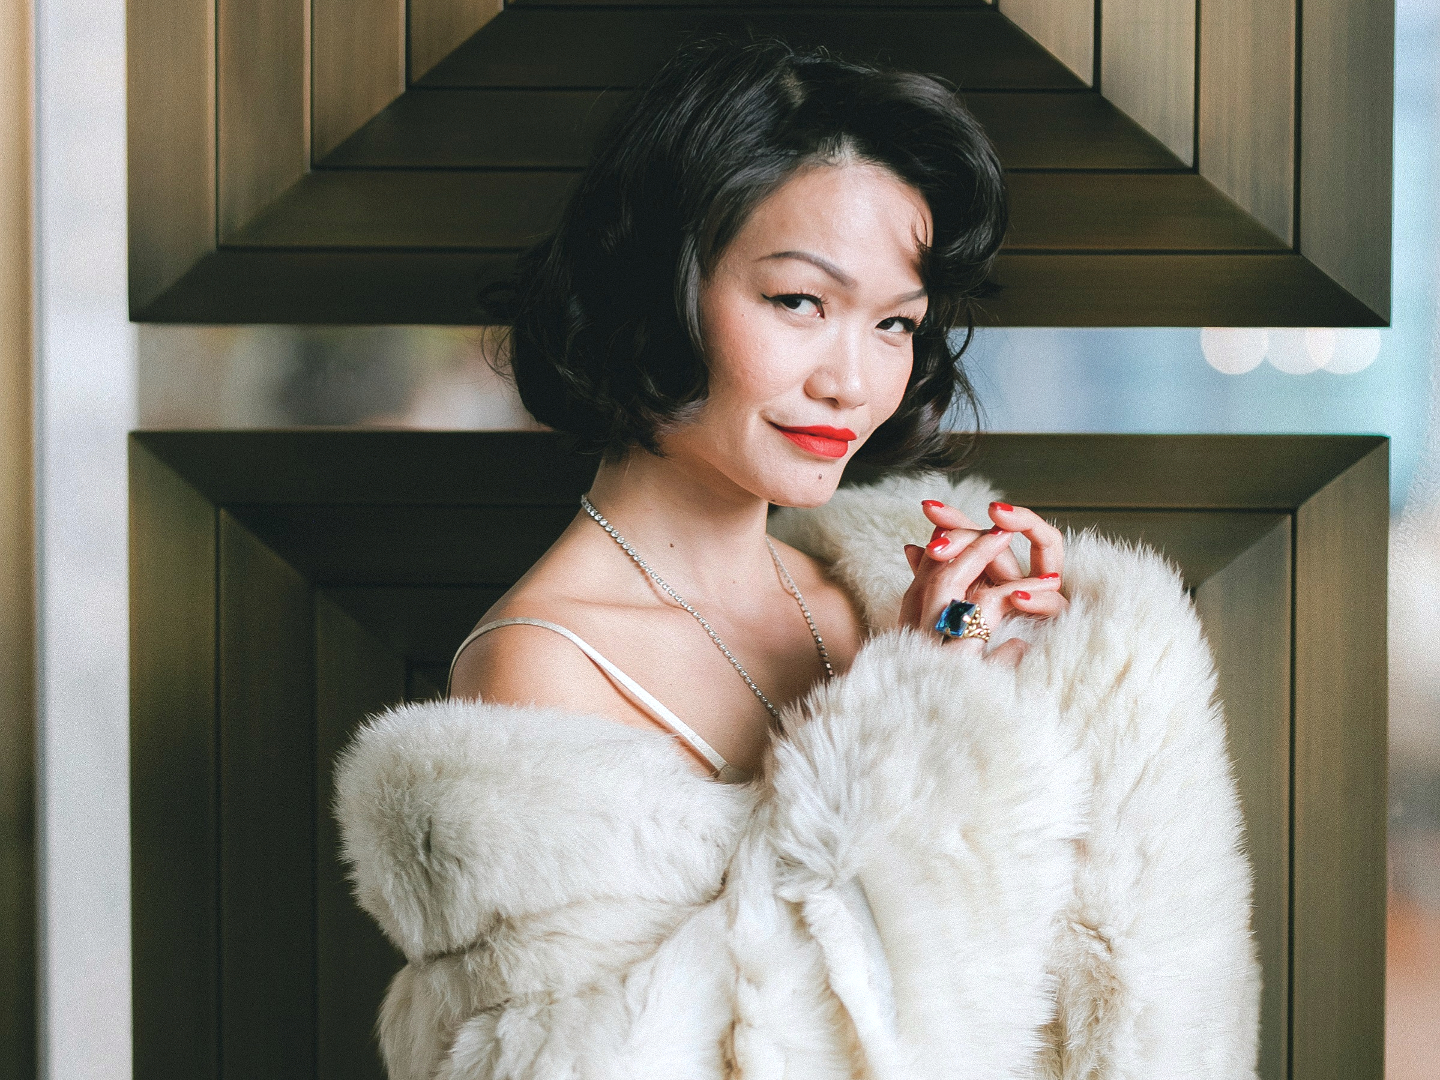 Jazz vocalist Janet Lee on the long-awaited return of live music in KL